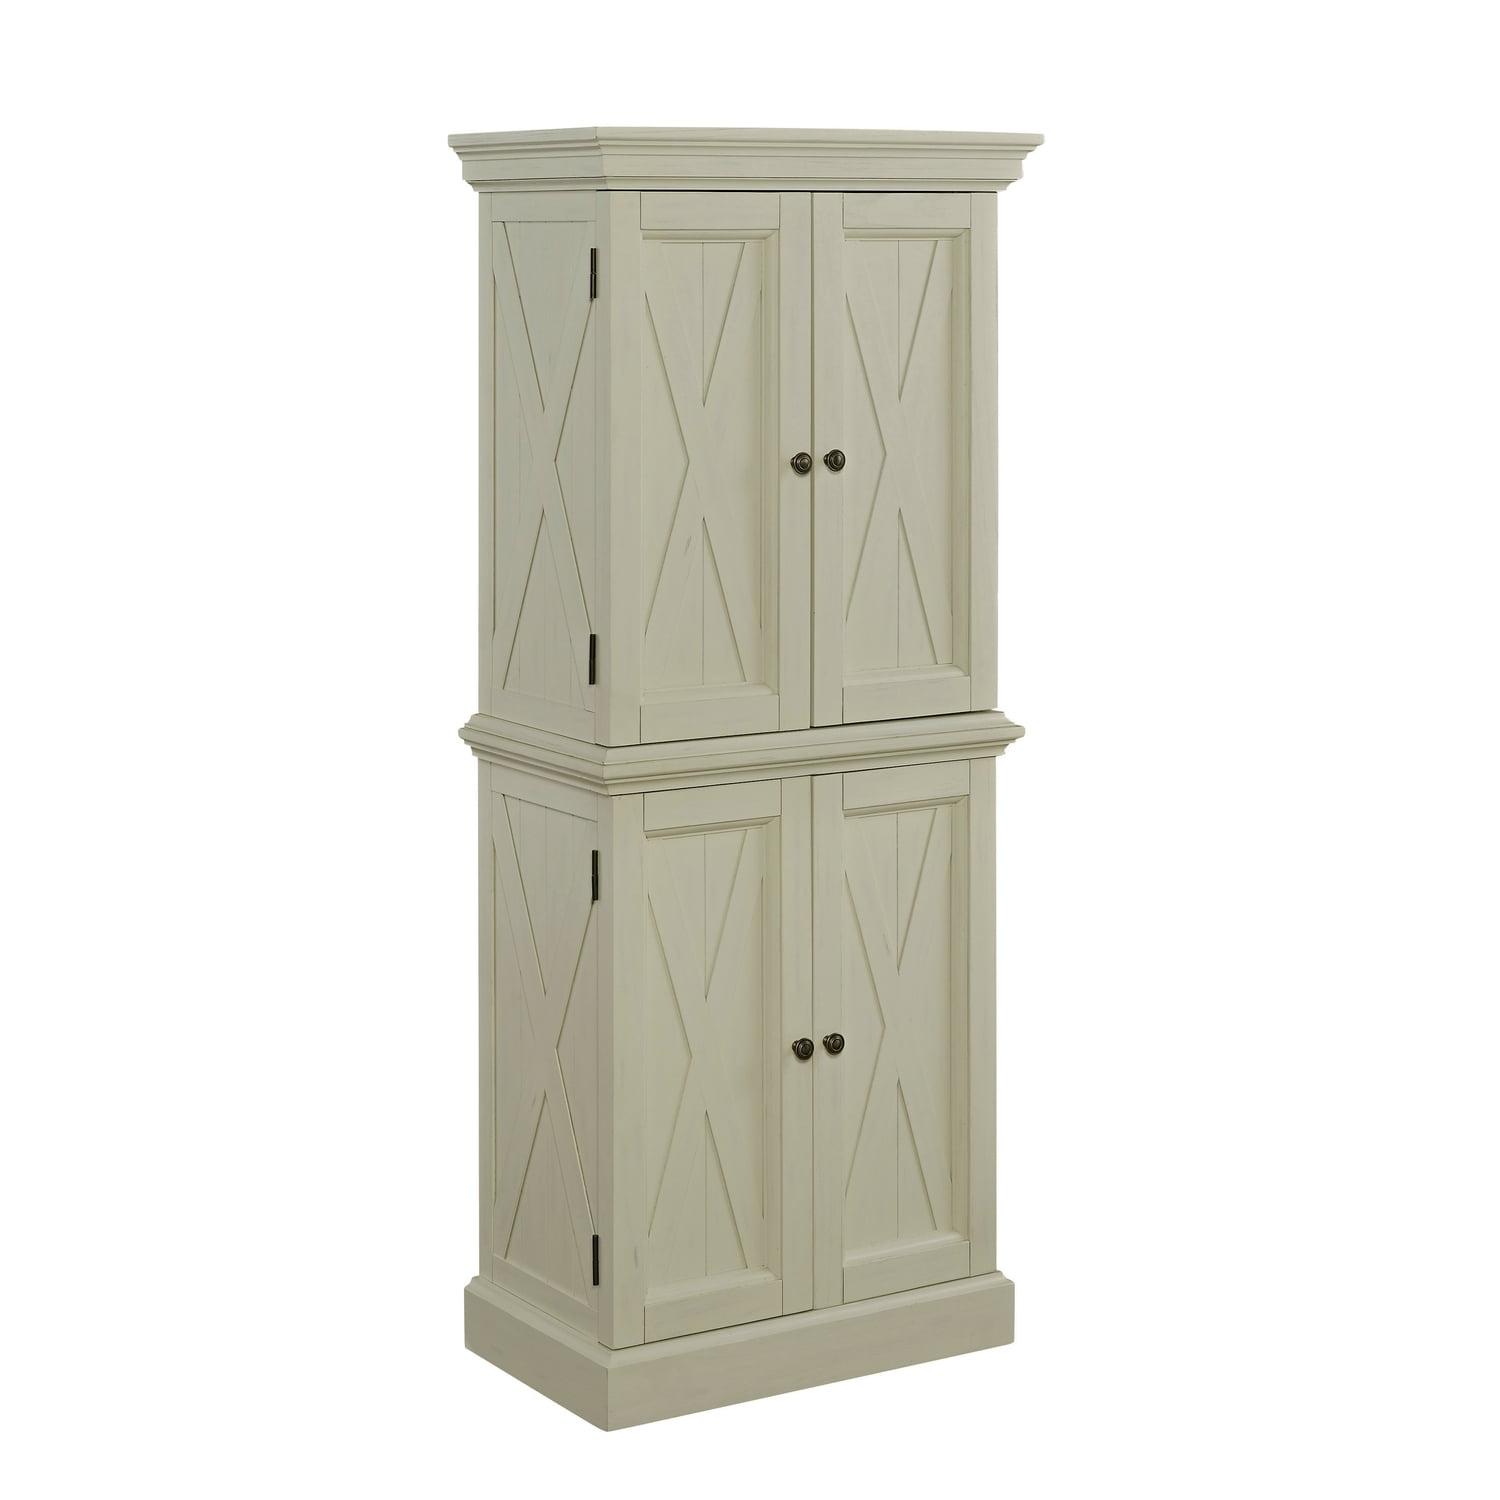 Seaside Lodge Classic White Kitchen Pantry with X-Pattern Cabinets